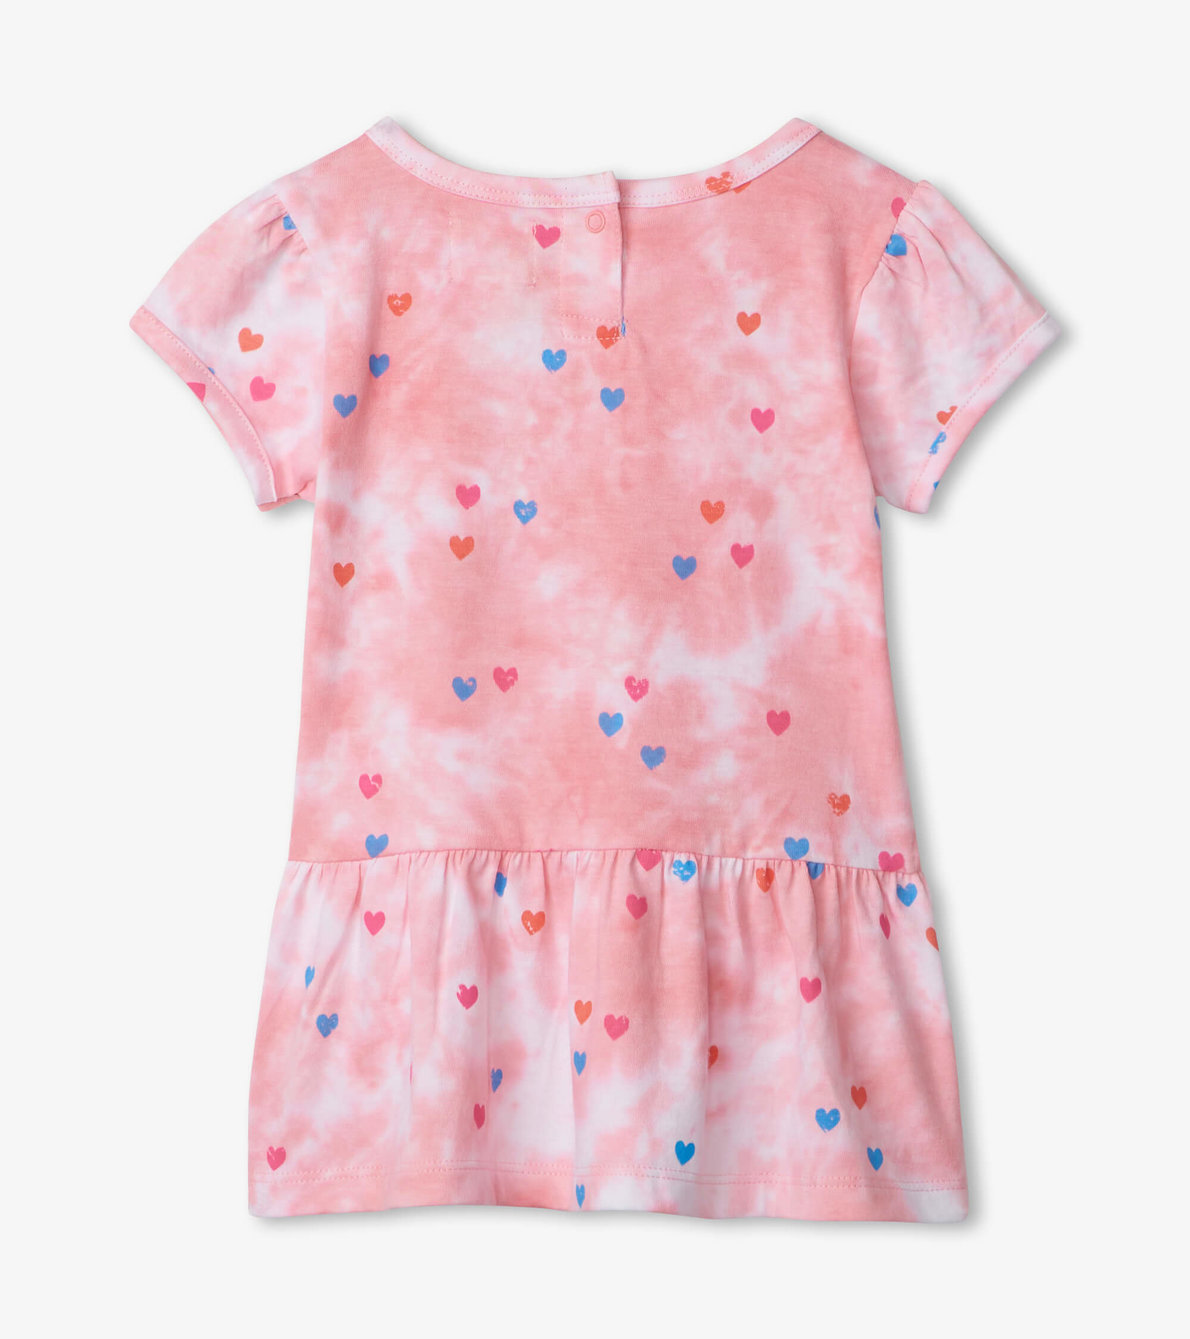 View larger image of Tie Dye Hearts Baby Gathered Dress